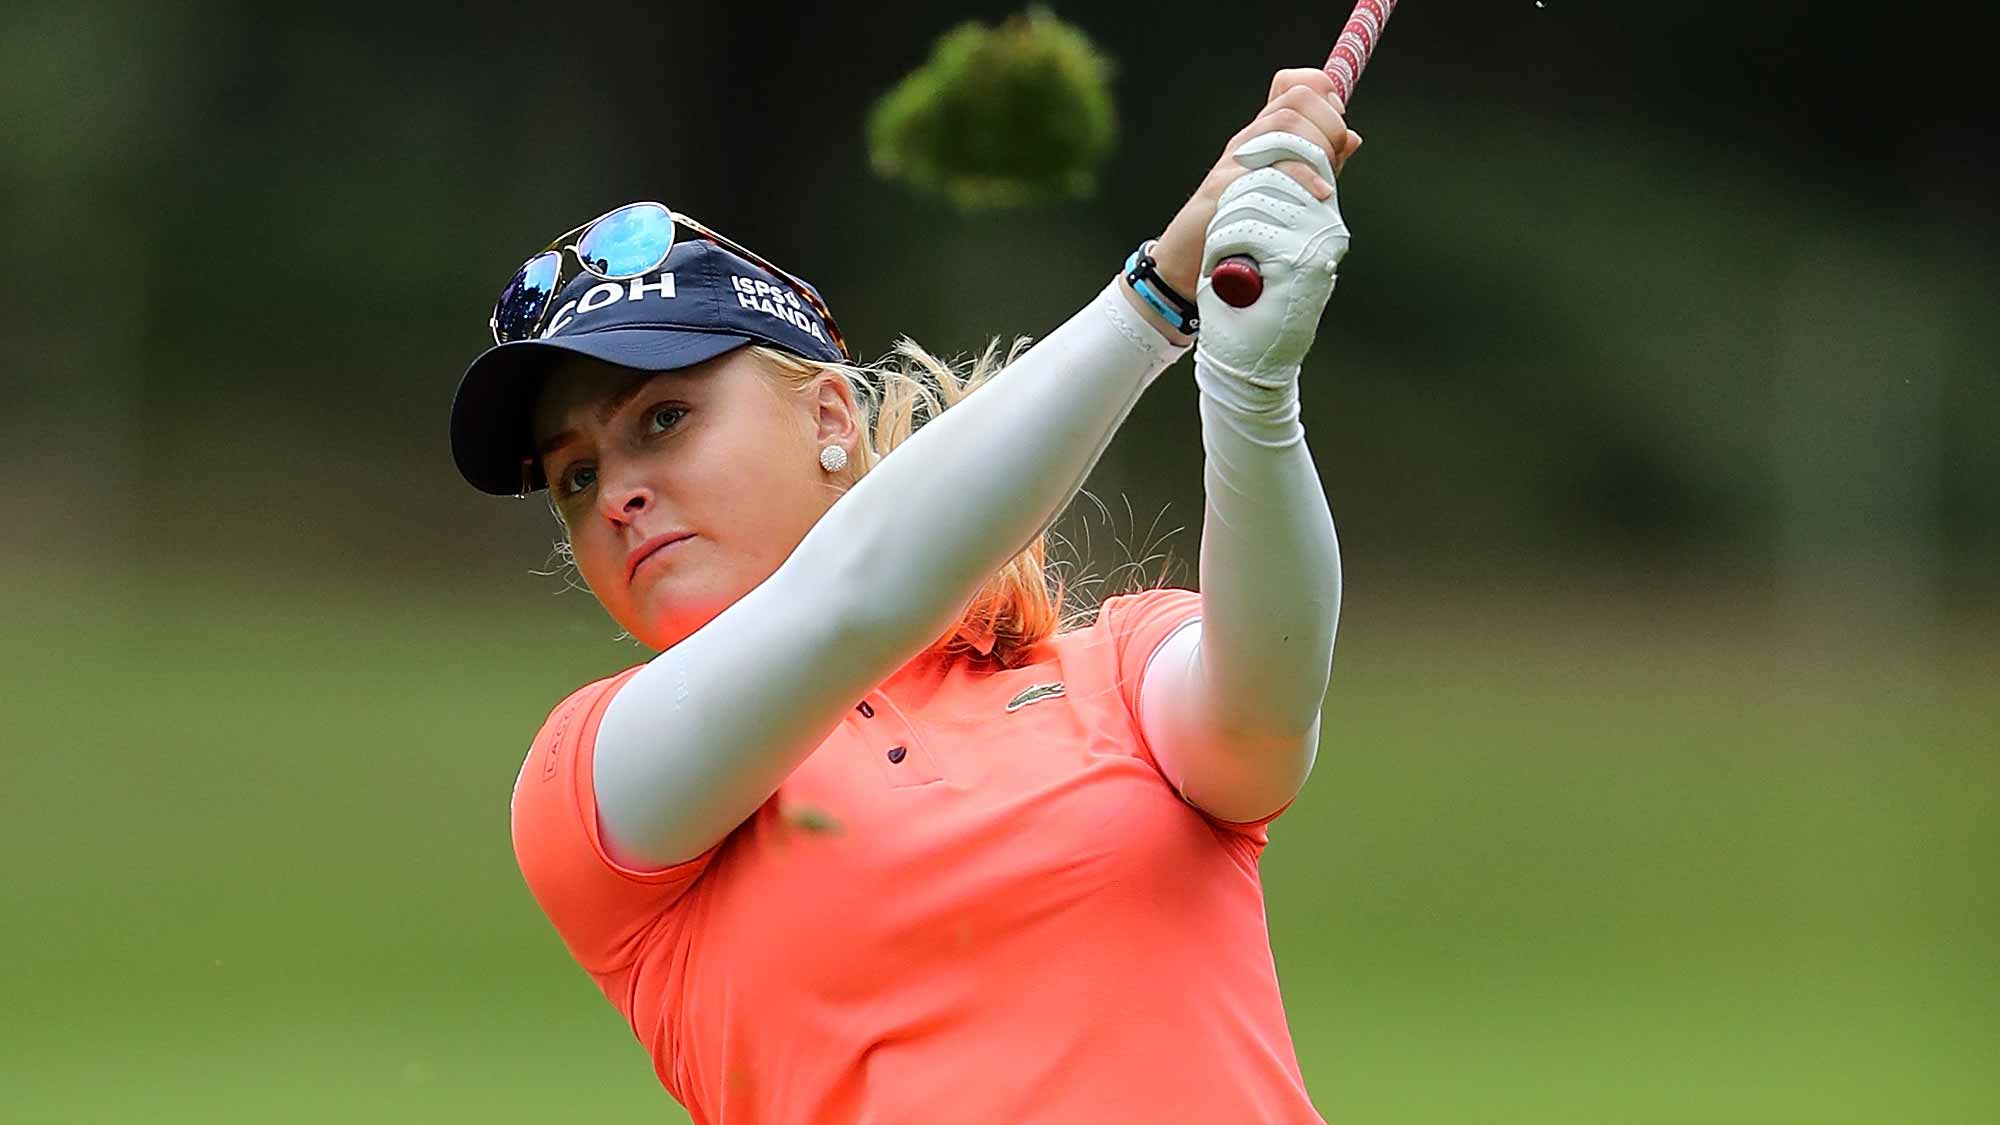 Charley Hull of England hits her second shot on the 18th hole during the final round of the Ricoh Women's British Open at Woburn Golf Club